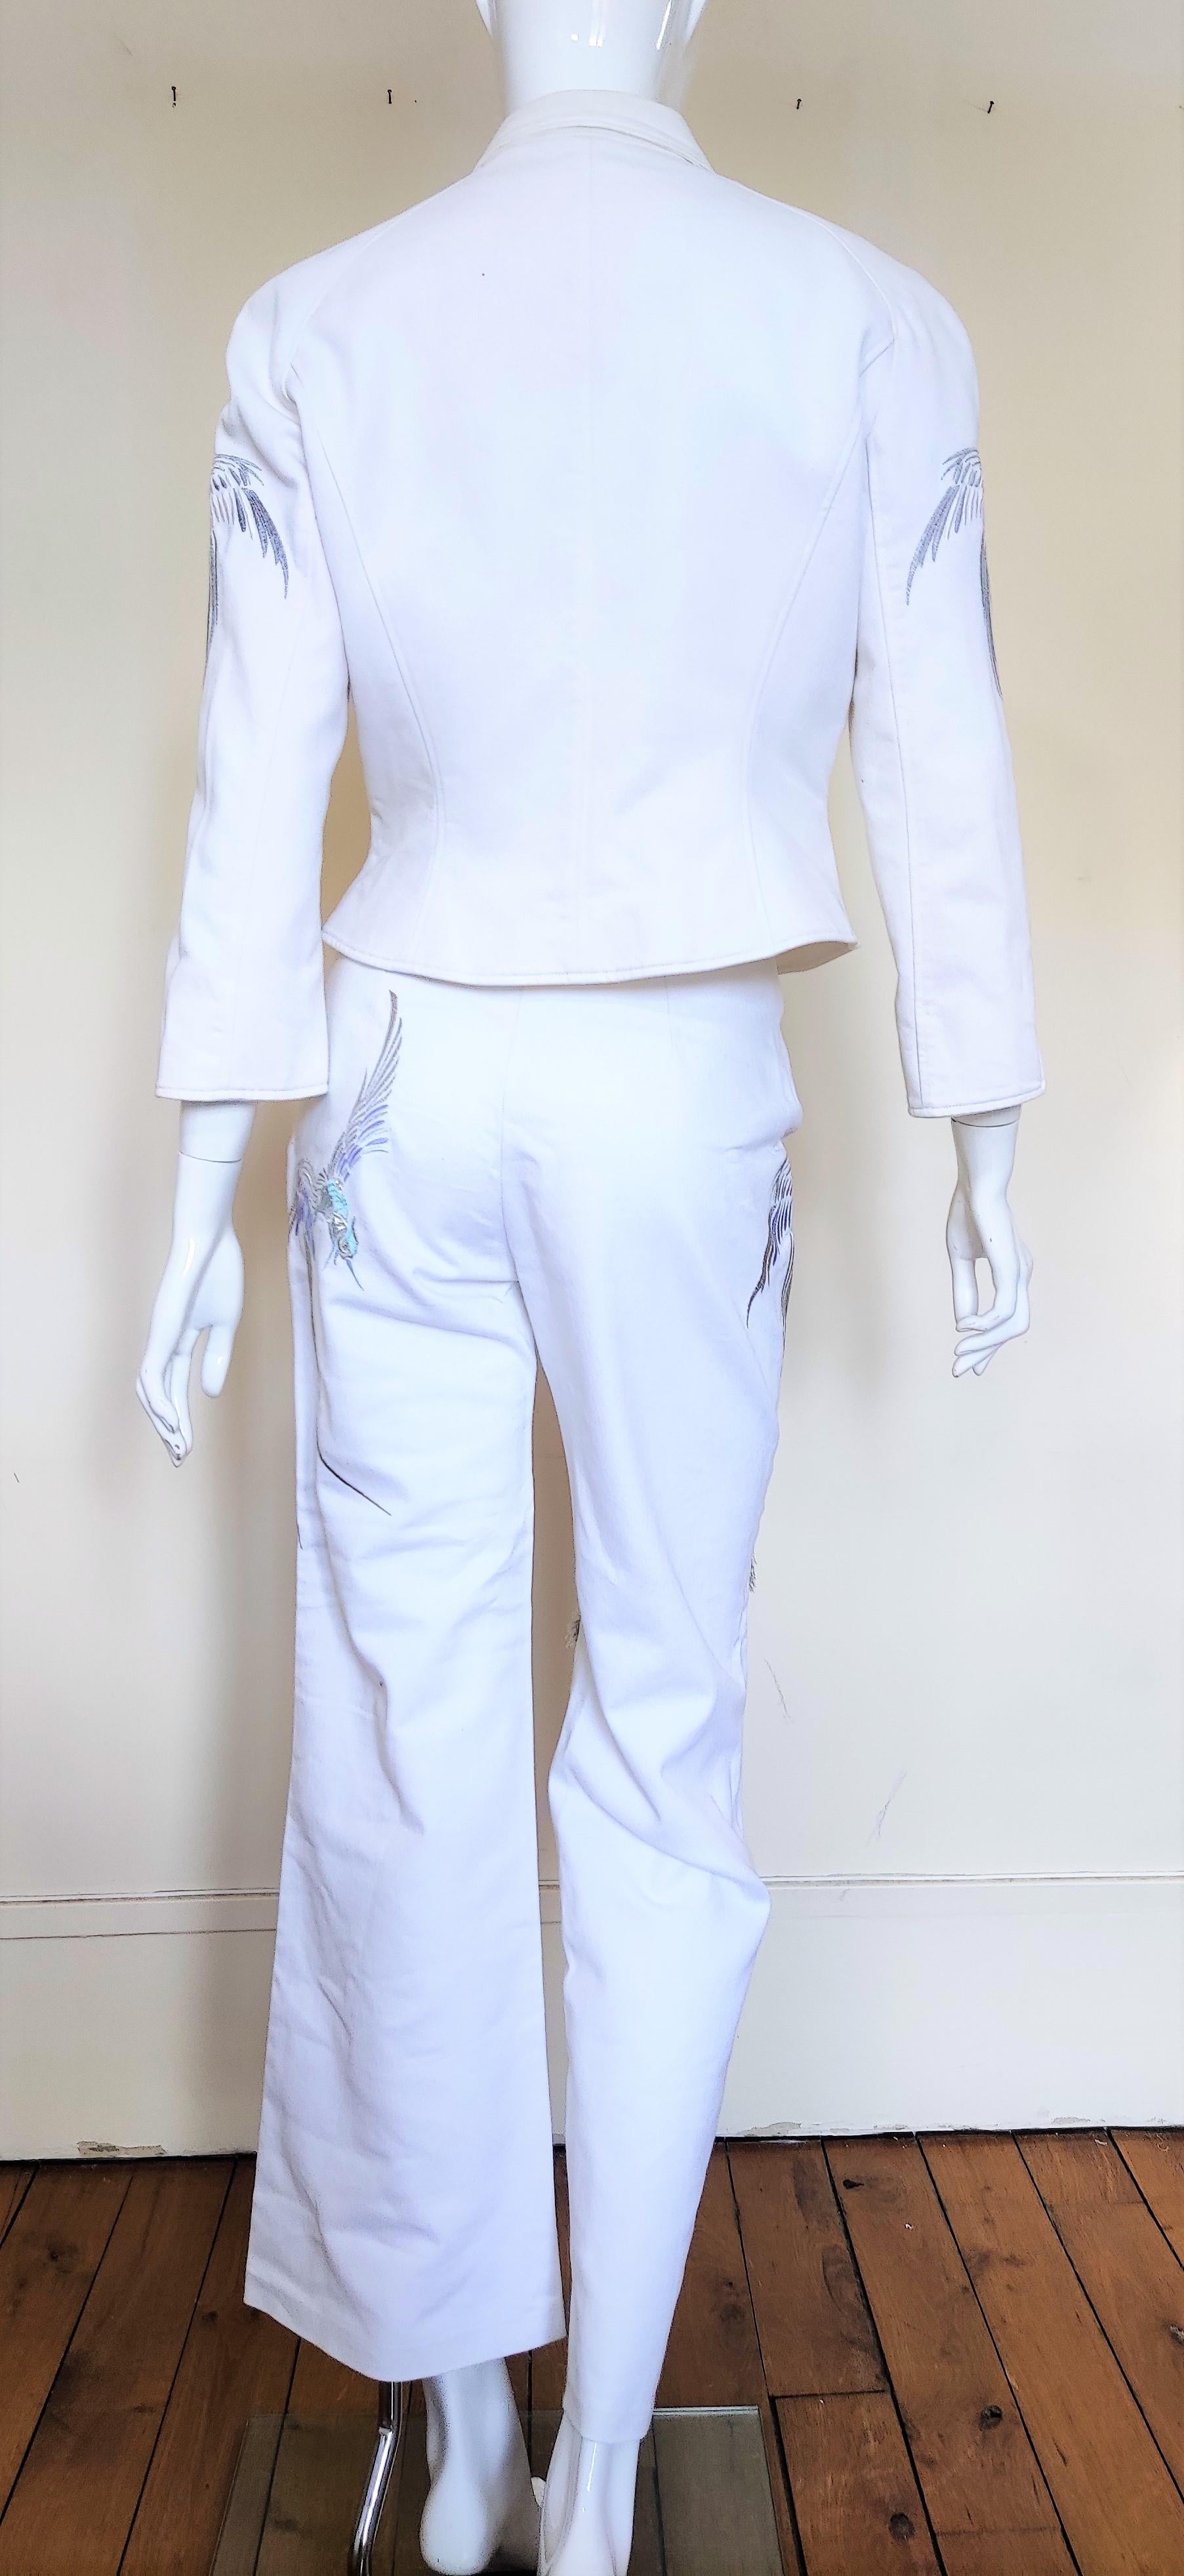 Thierry Mugler Peacock Bird White Gown Couture Pants Jacket Ensemble Suit In Excellent Condition For Sale In PARIS, FR